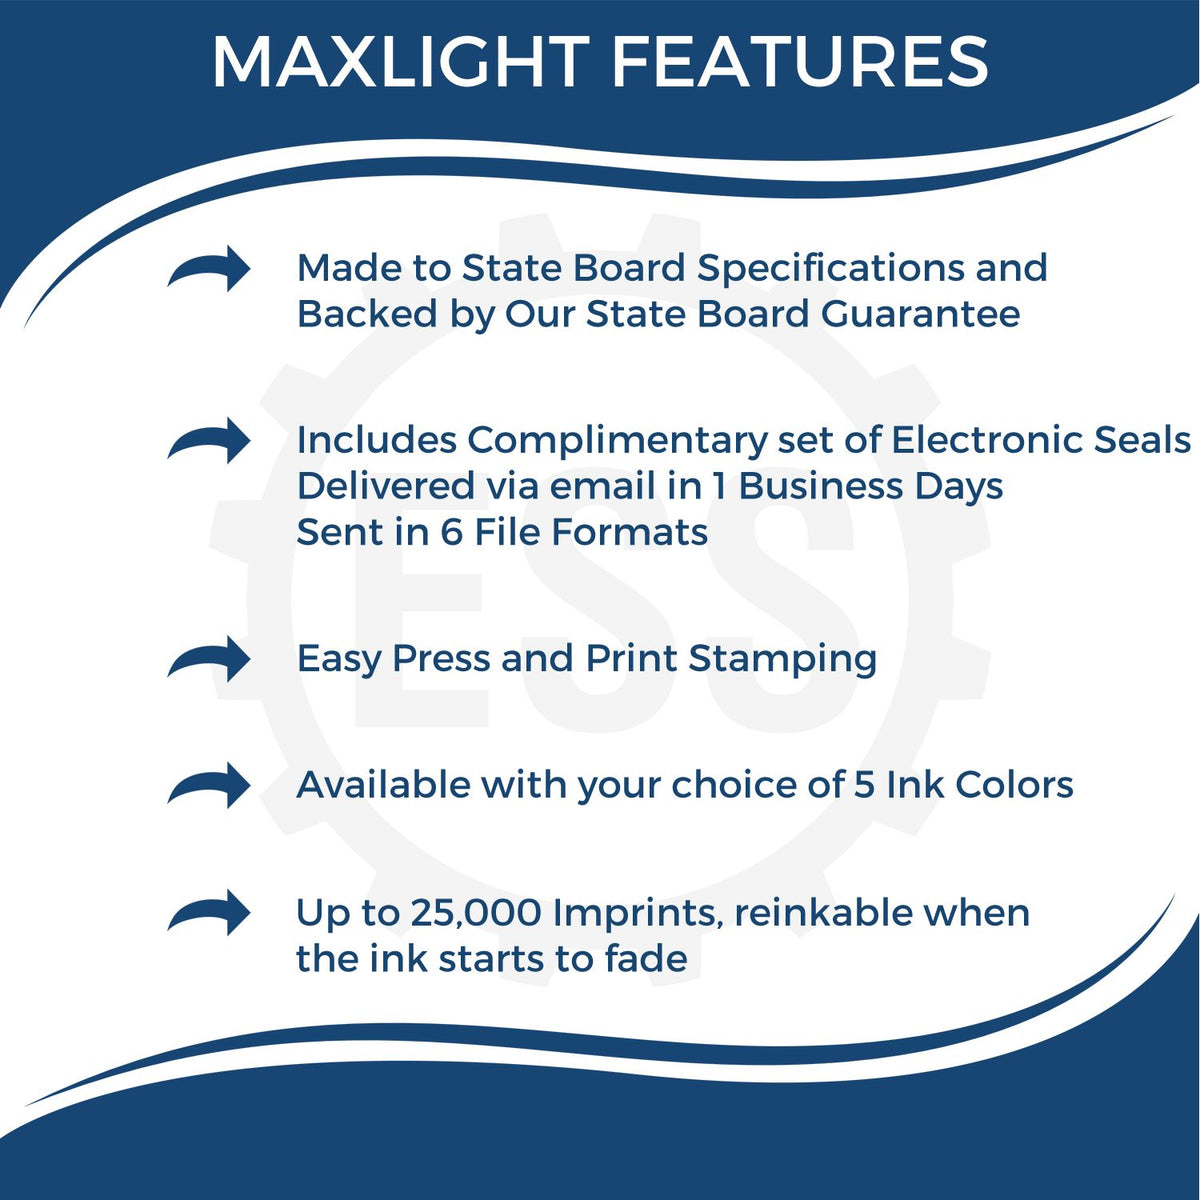 A picture of an infographic highlighting the selling points for the MaxLight Premium Pre-Inked North Dakota Rectangular Notarial Stamp